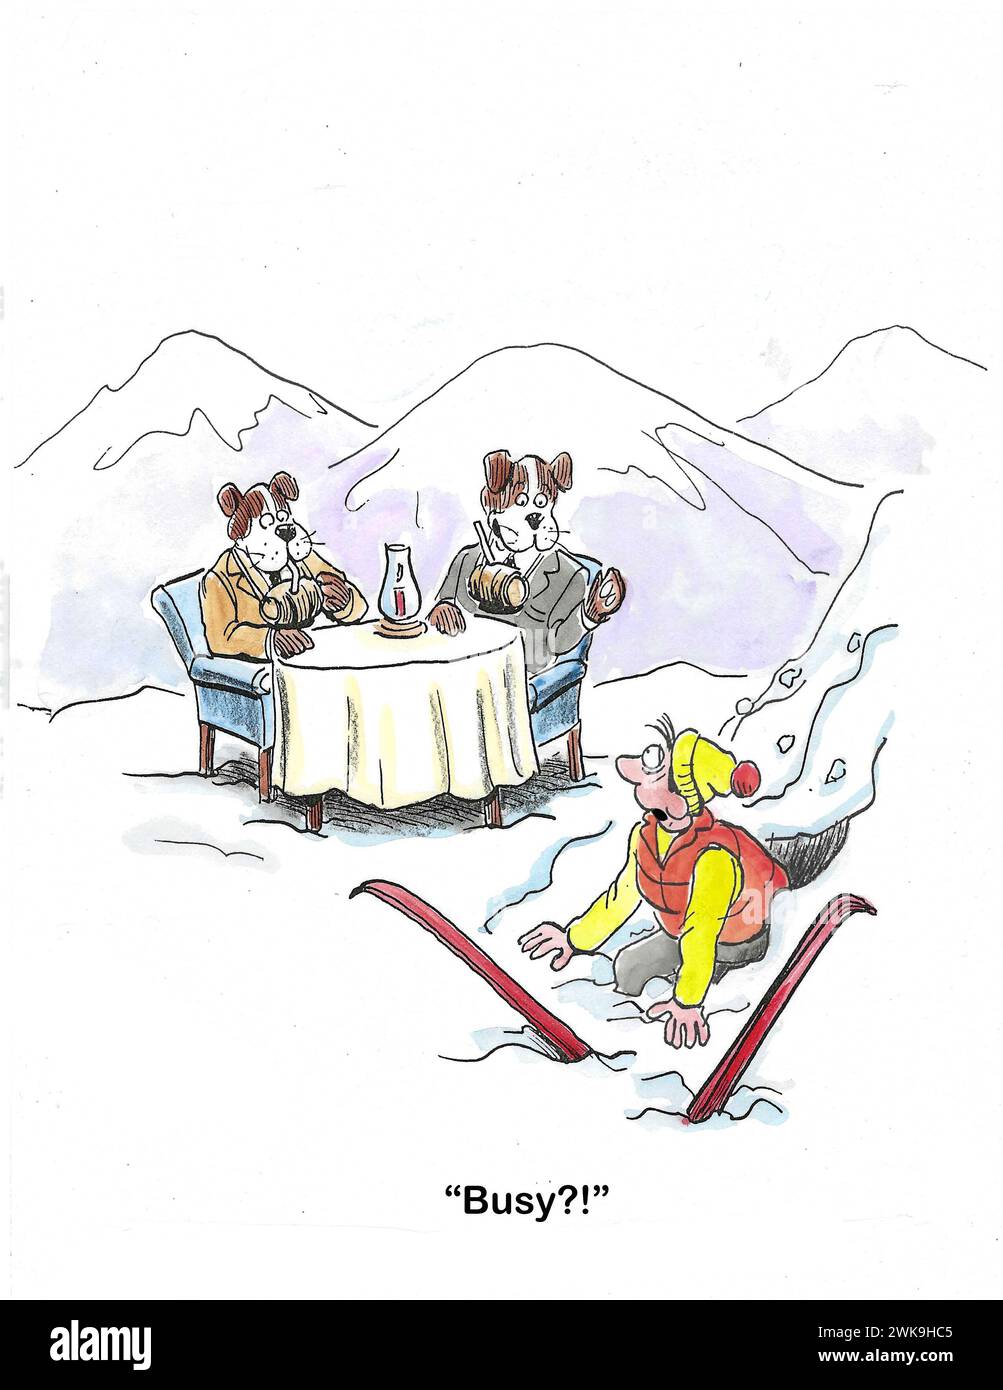 Color cartoon showing two Saint Bernard dogs drinking wine and talking.  They are too busy to aid the skier in the snowdrift. Stock Photo